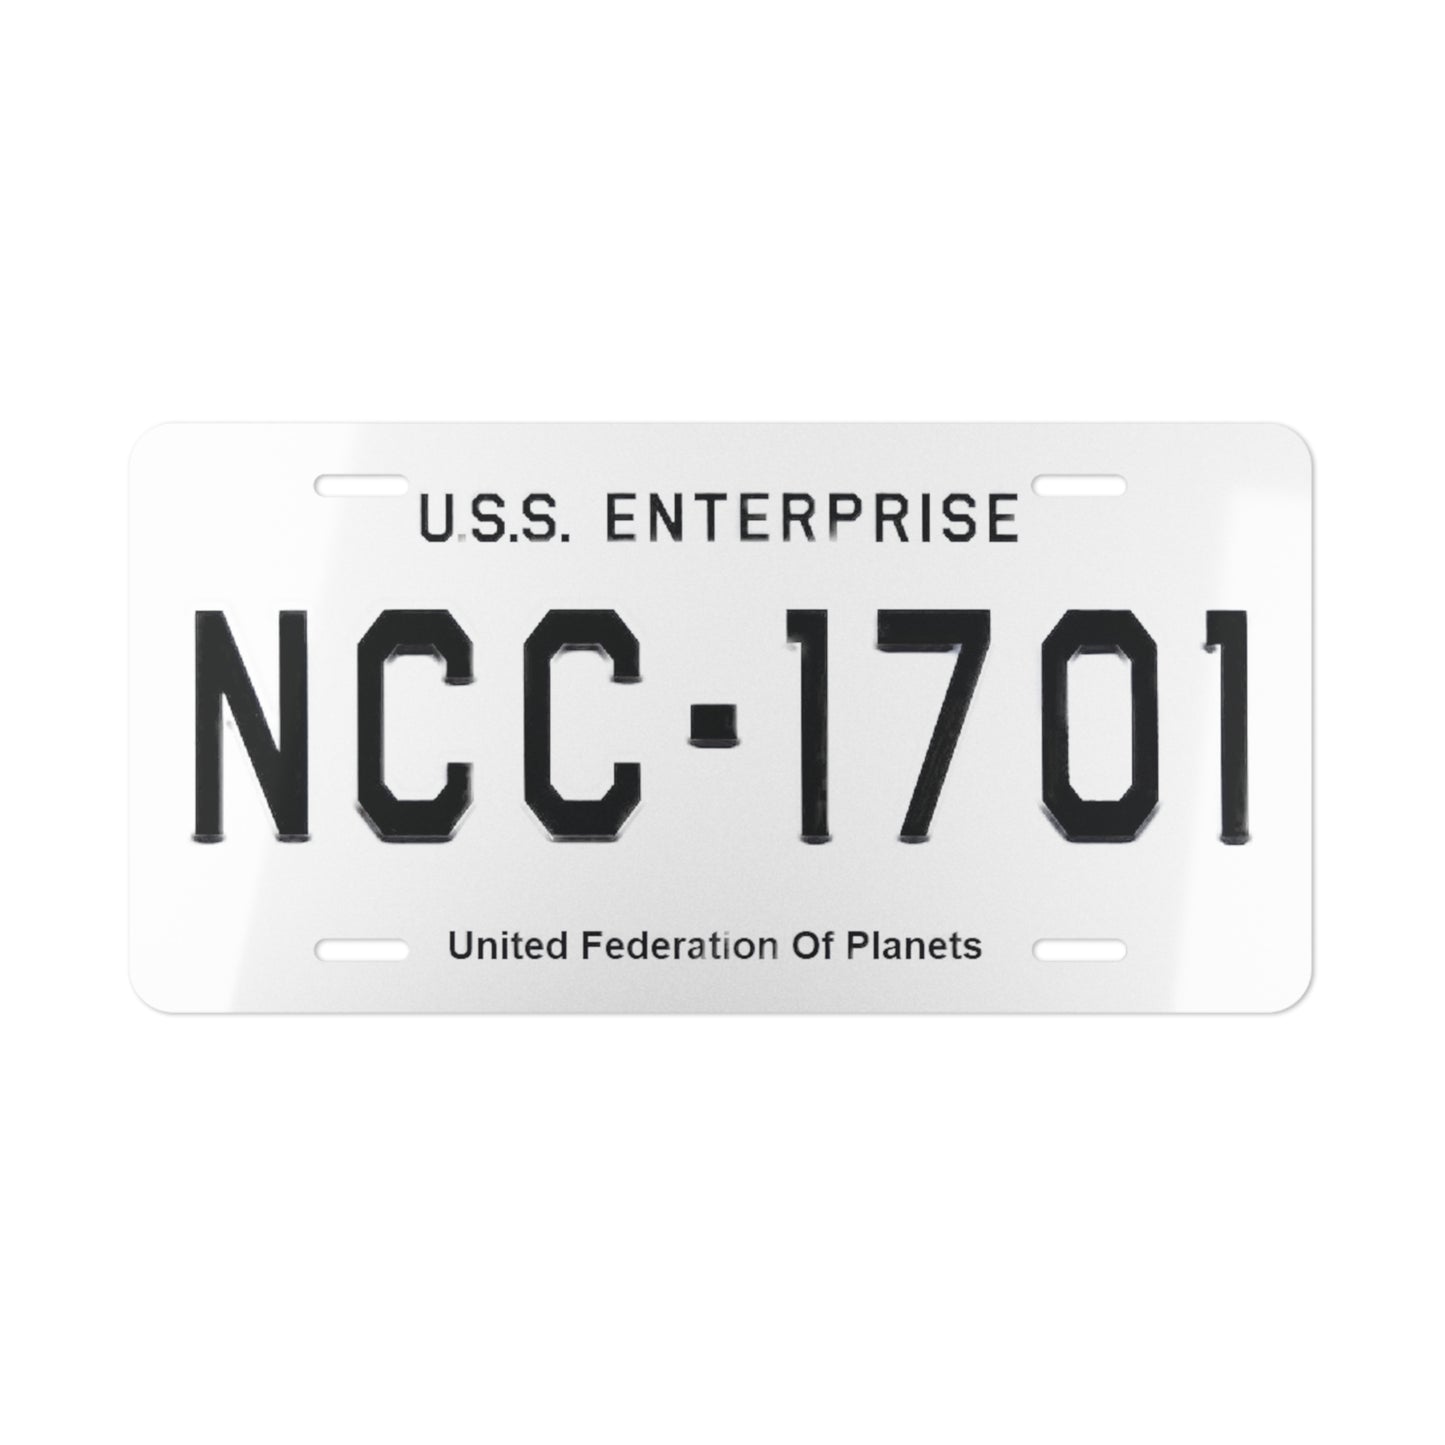 USS Enterprise United Federation Of Planets Vanity License Plate